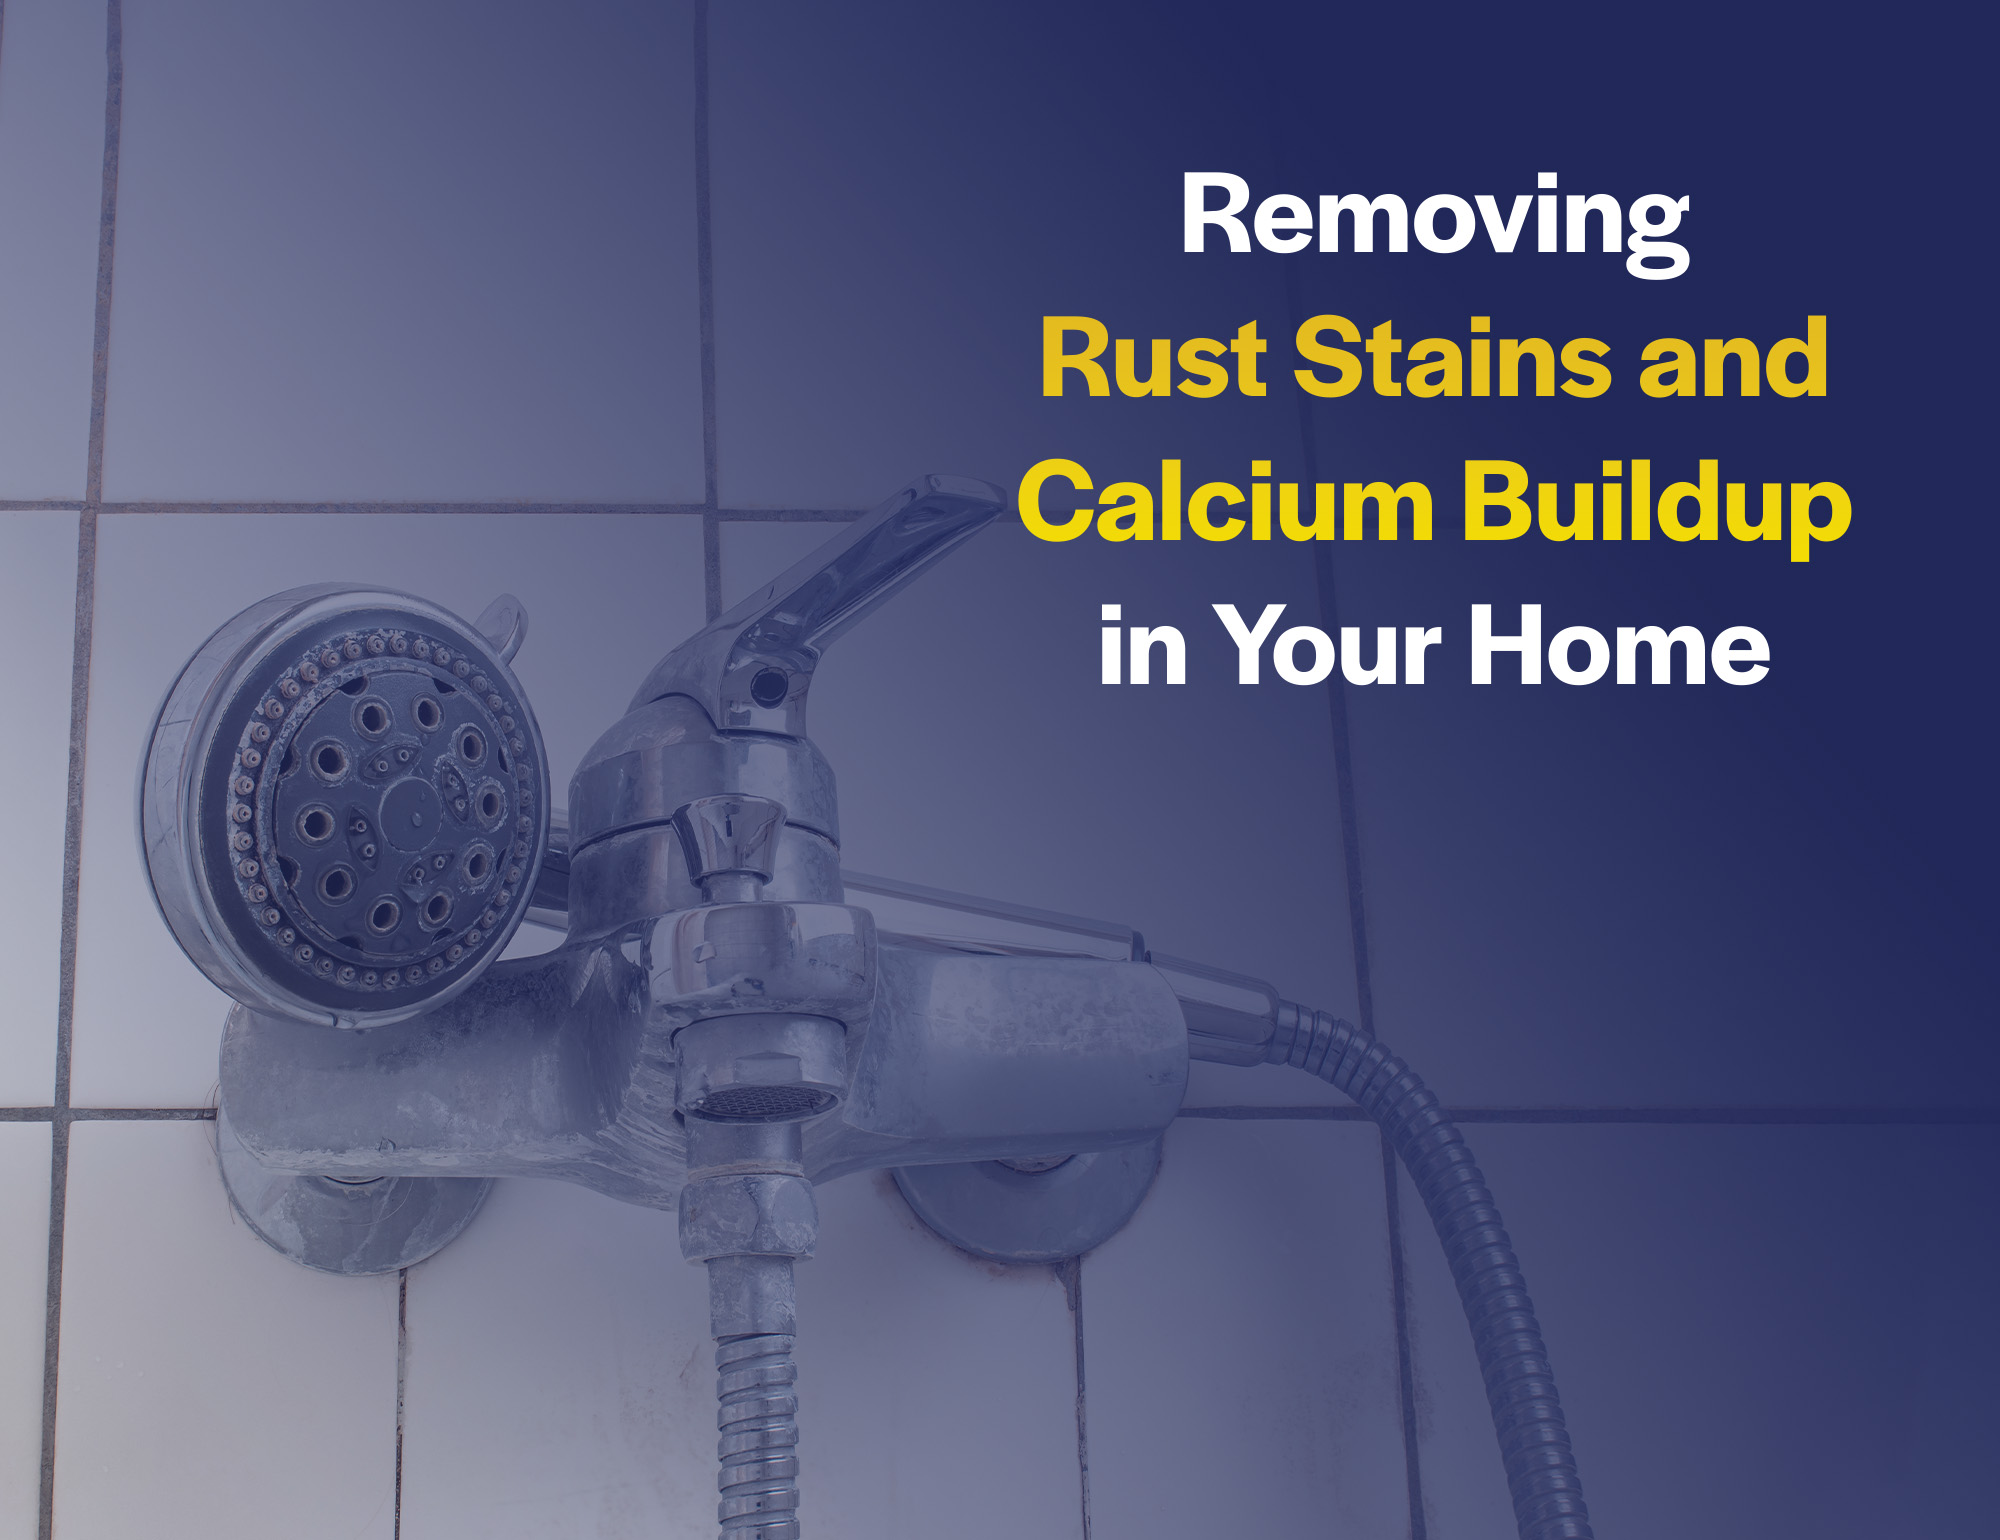 Removing Rust Stains and Calcium Buildup in Your Home